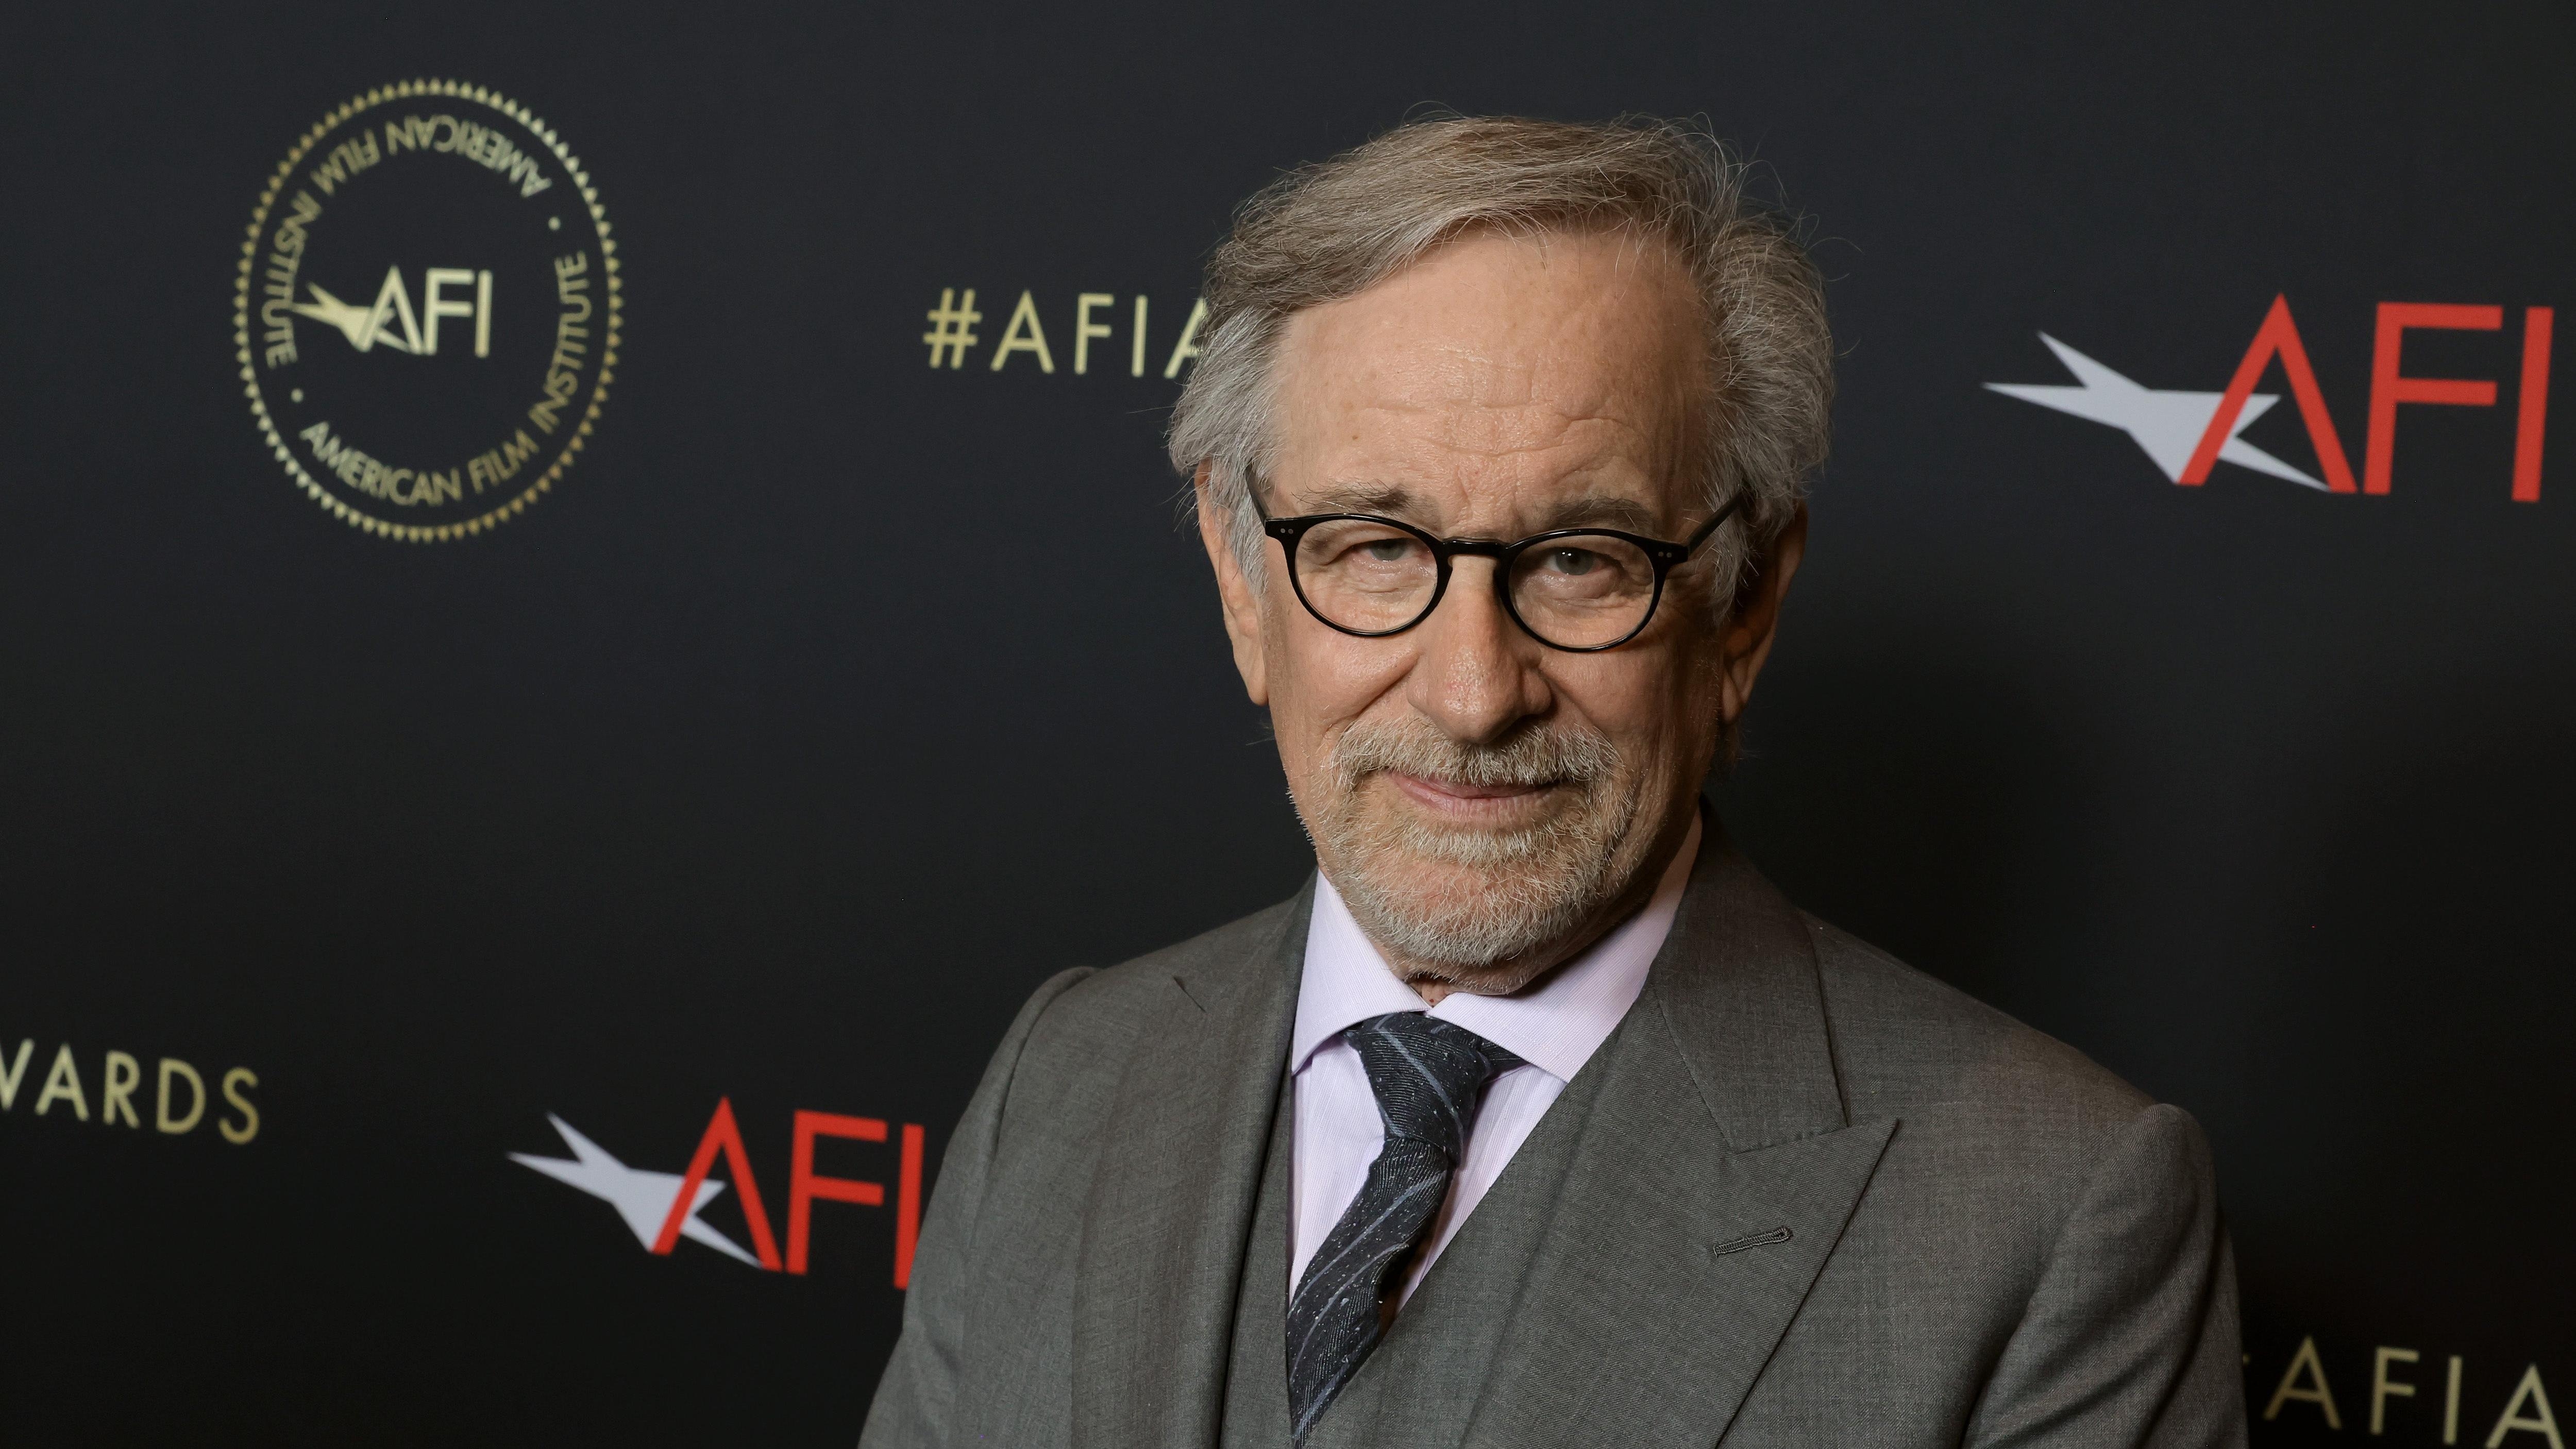 West Side Story director Steven Spielberg says he’s done with directing musicals